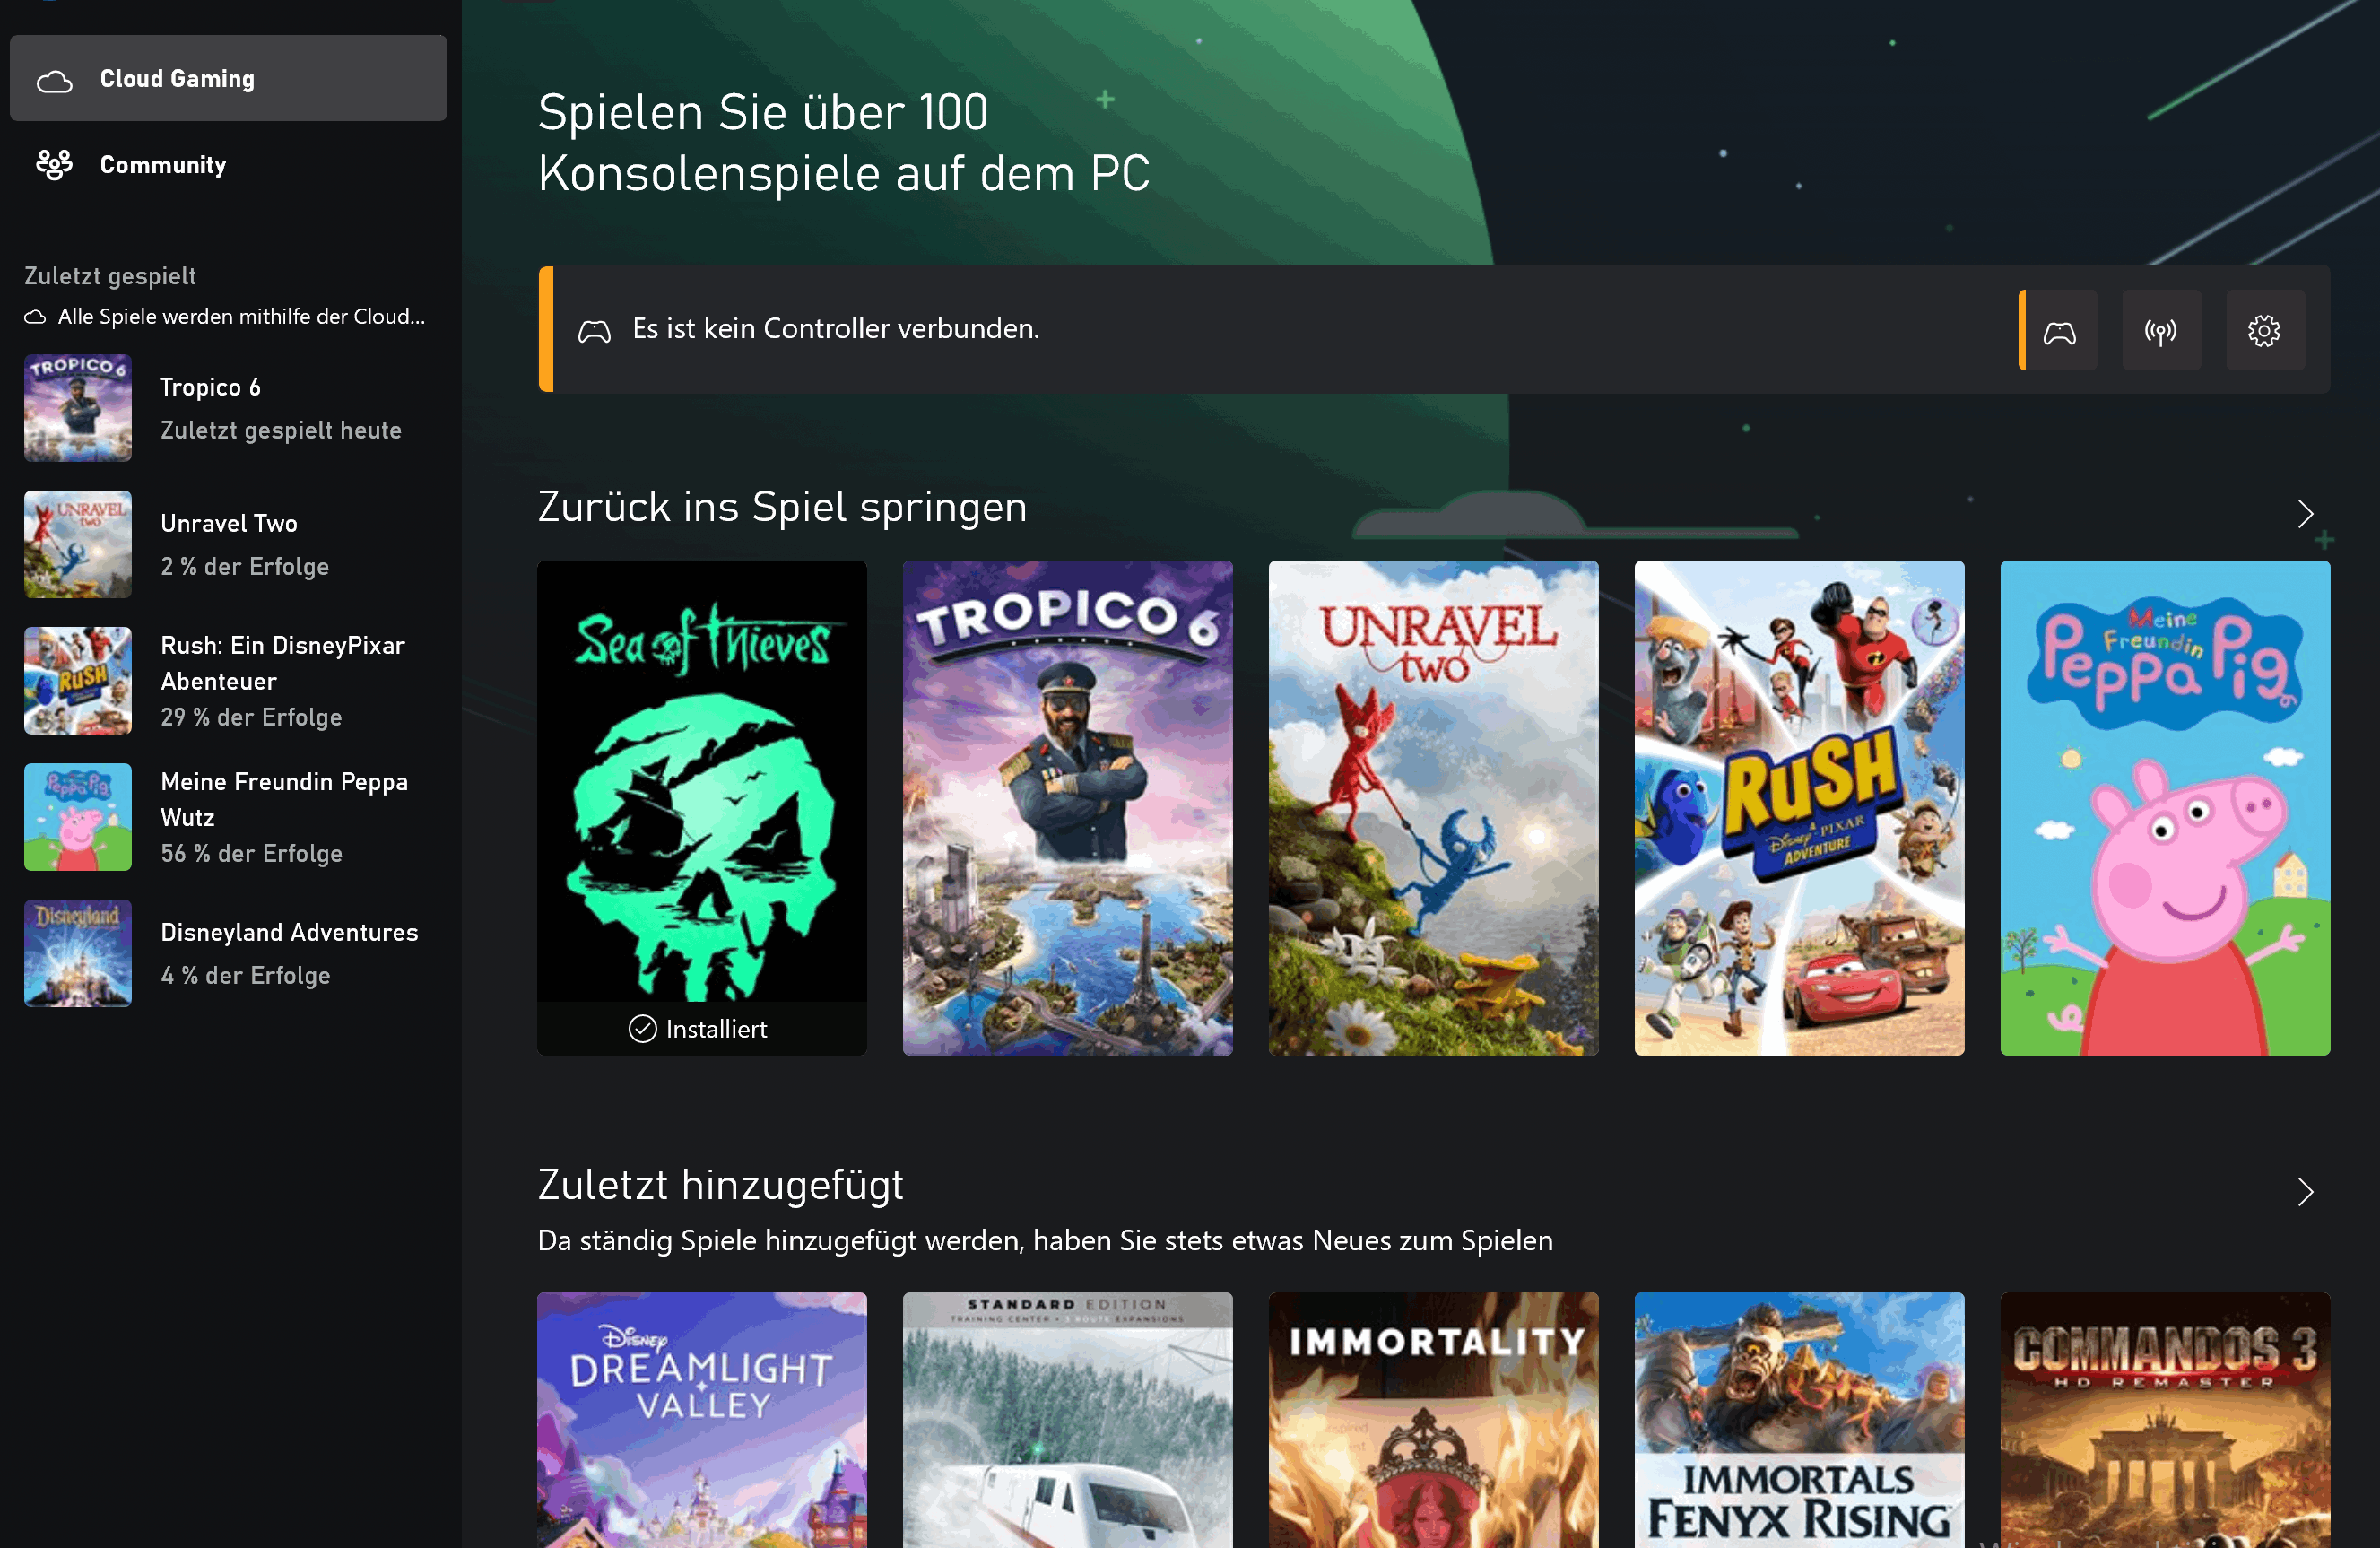 GAMES PURCHASED IN THE XBOX STORE APPEARING IN XBOX CLOUD GAMING